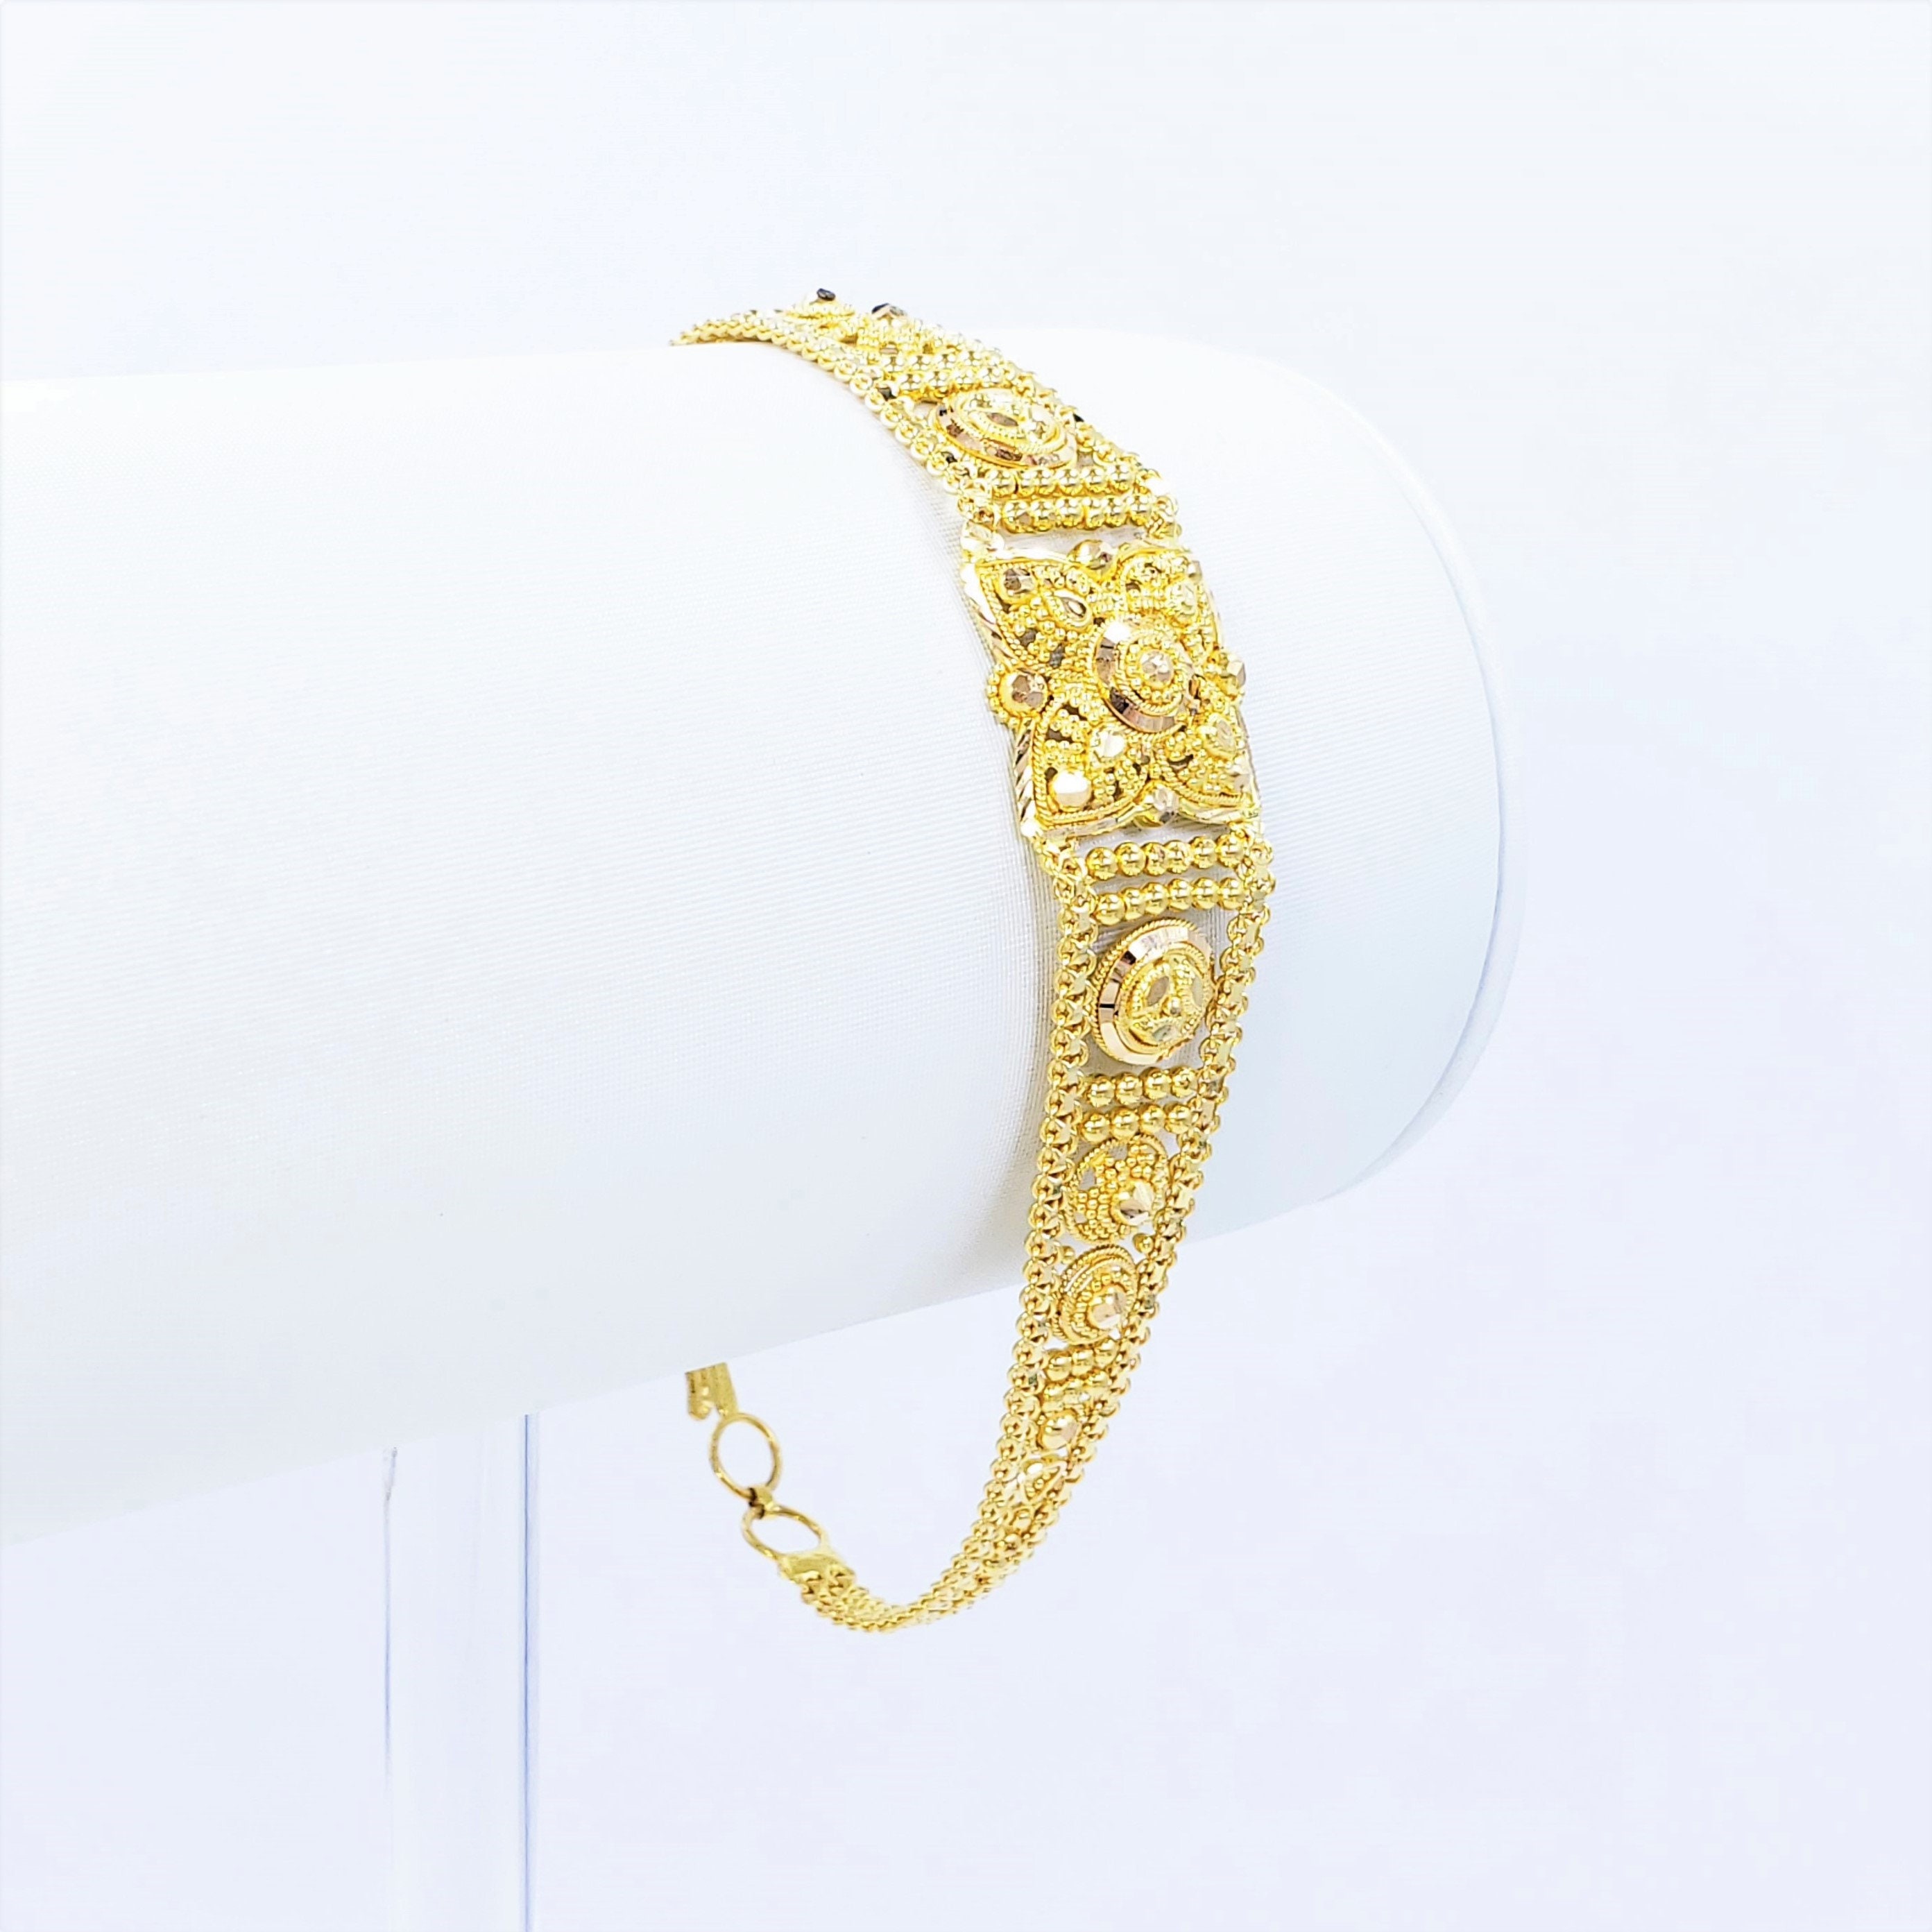 Ladies Gold Bracelet - brla19566 - 22K Gold bracelet for ladies is designed  with beaded gold balls in a fancy pattern with laser cuts a